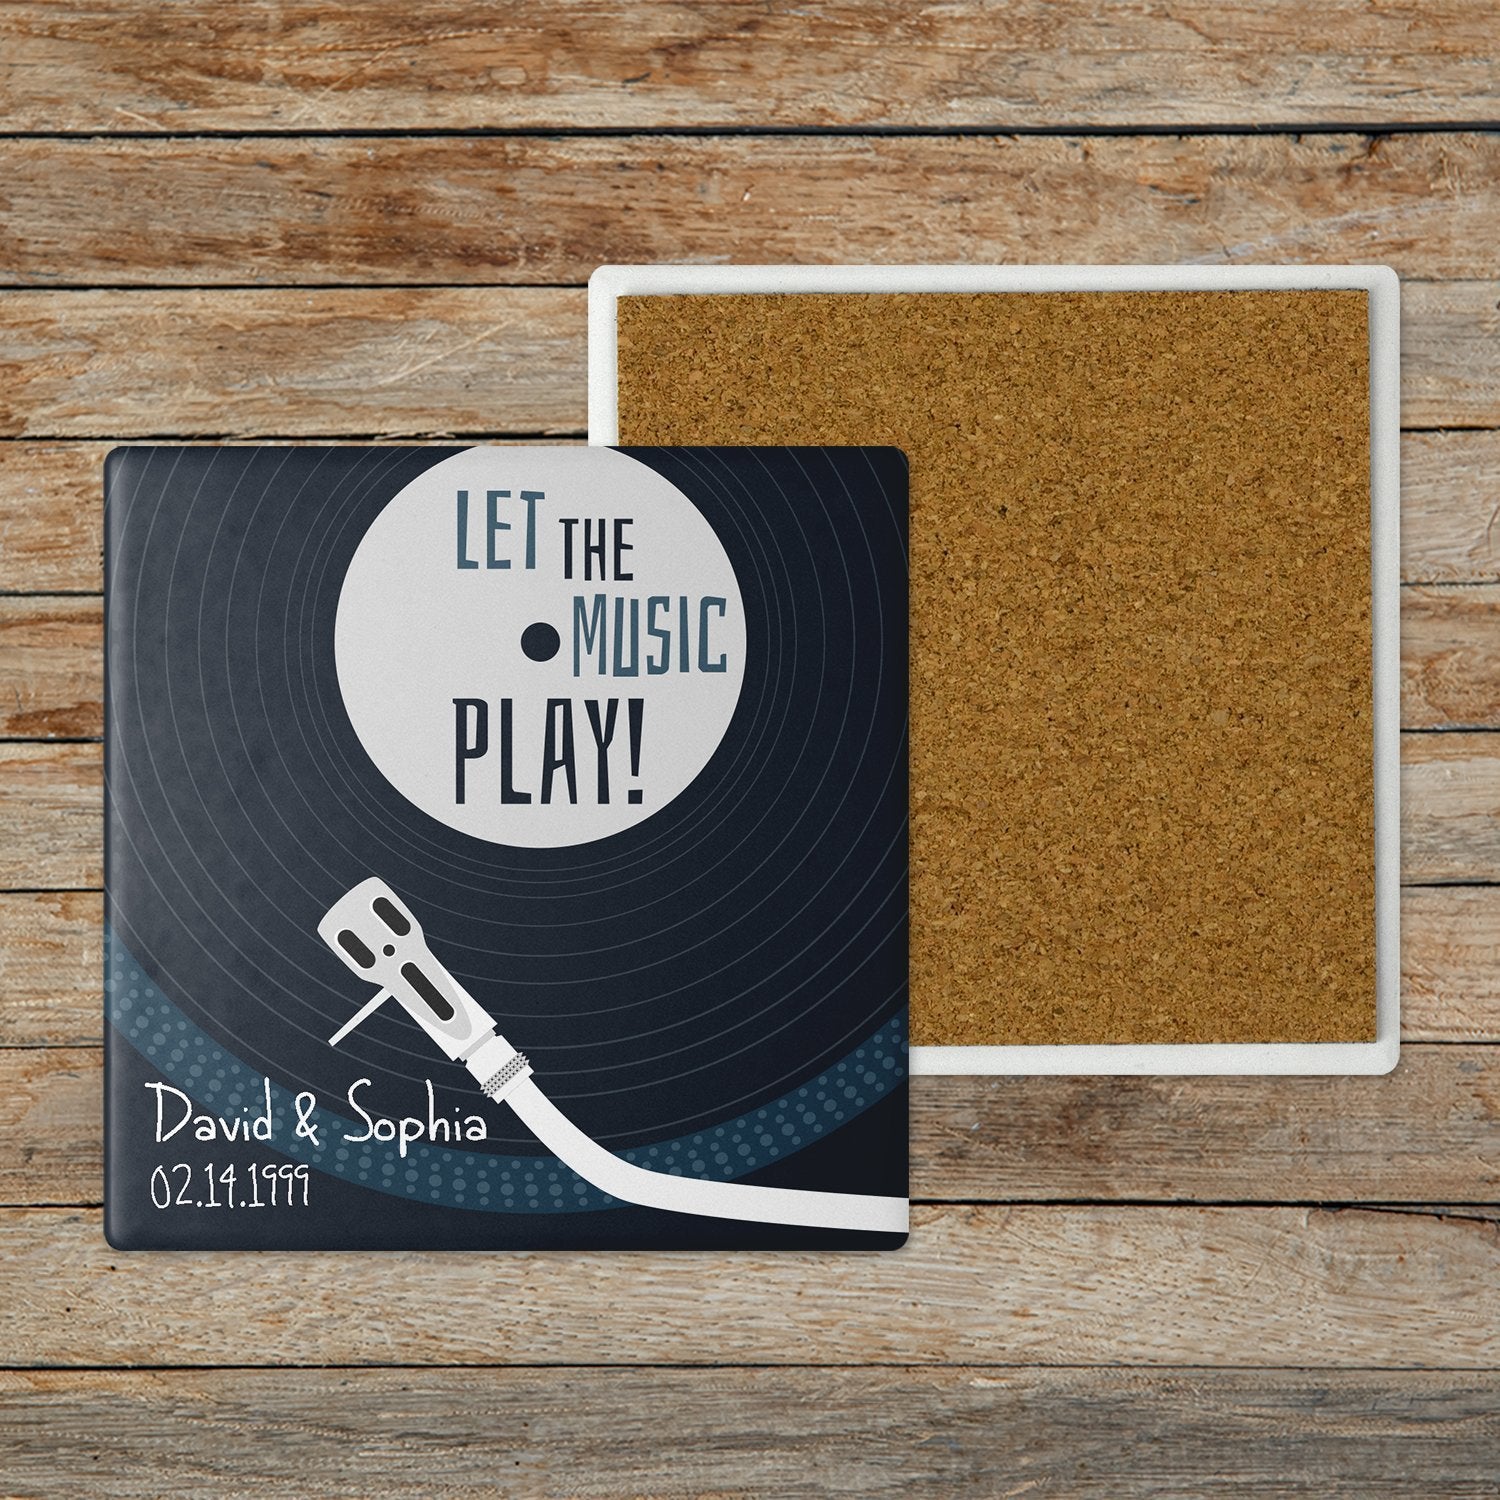 Custom Stone Coasters, Set Of 4, Let The Music Play